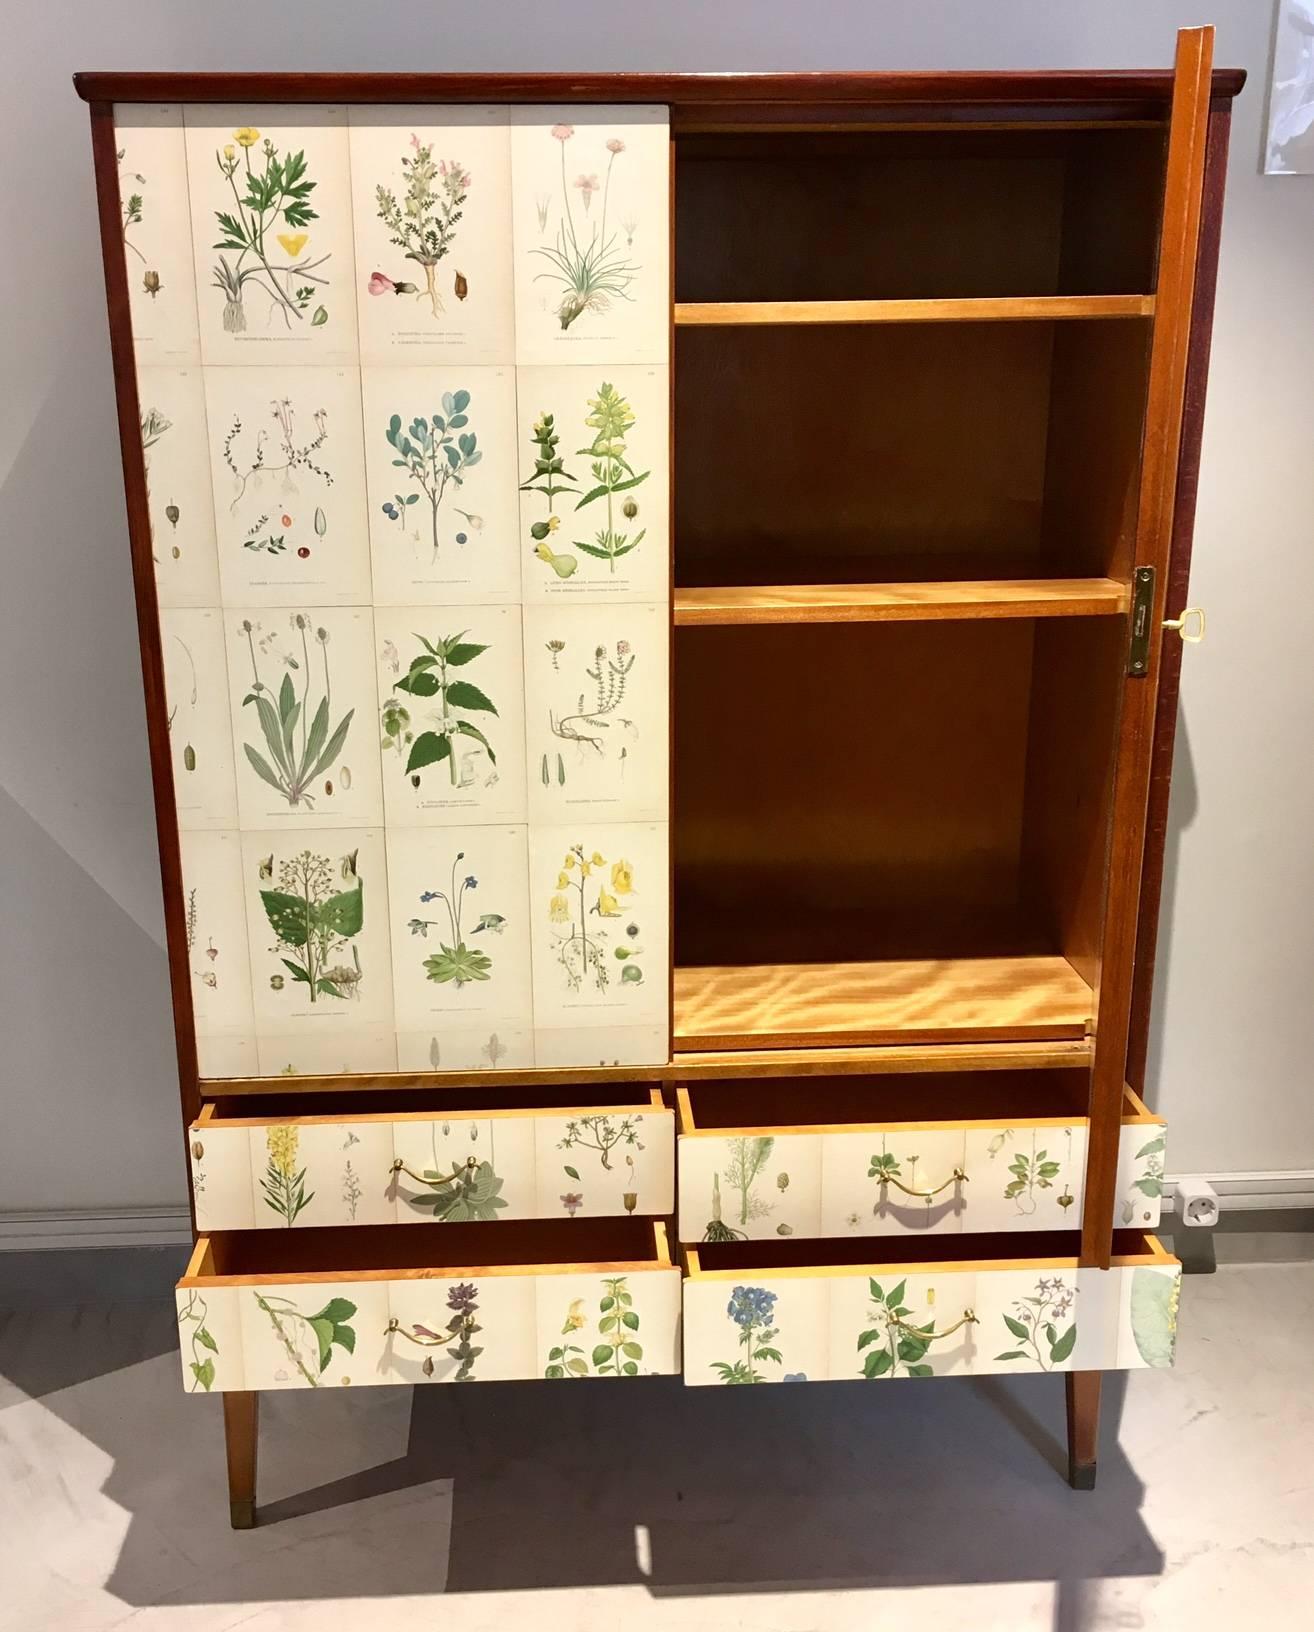 Tall Wooden Cabinet with Nordens Flora Illustrations by C.A. Lindman 2